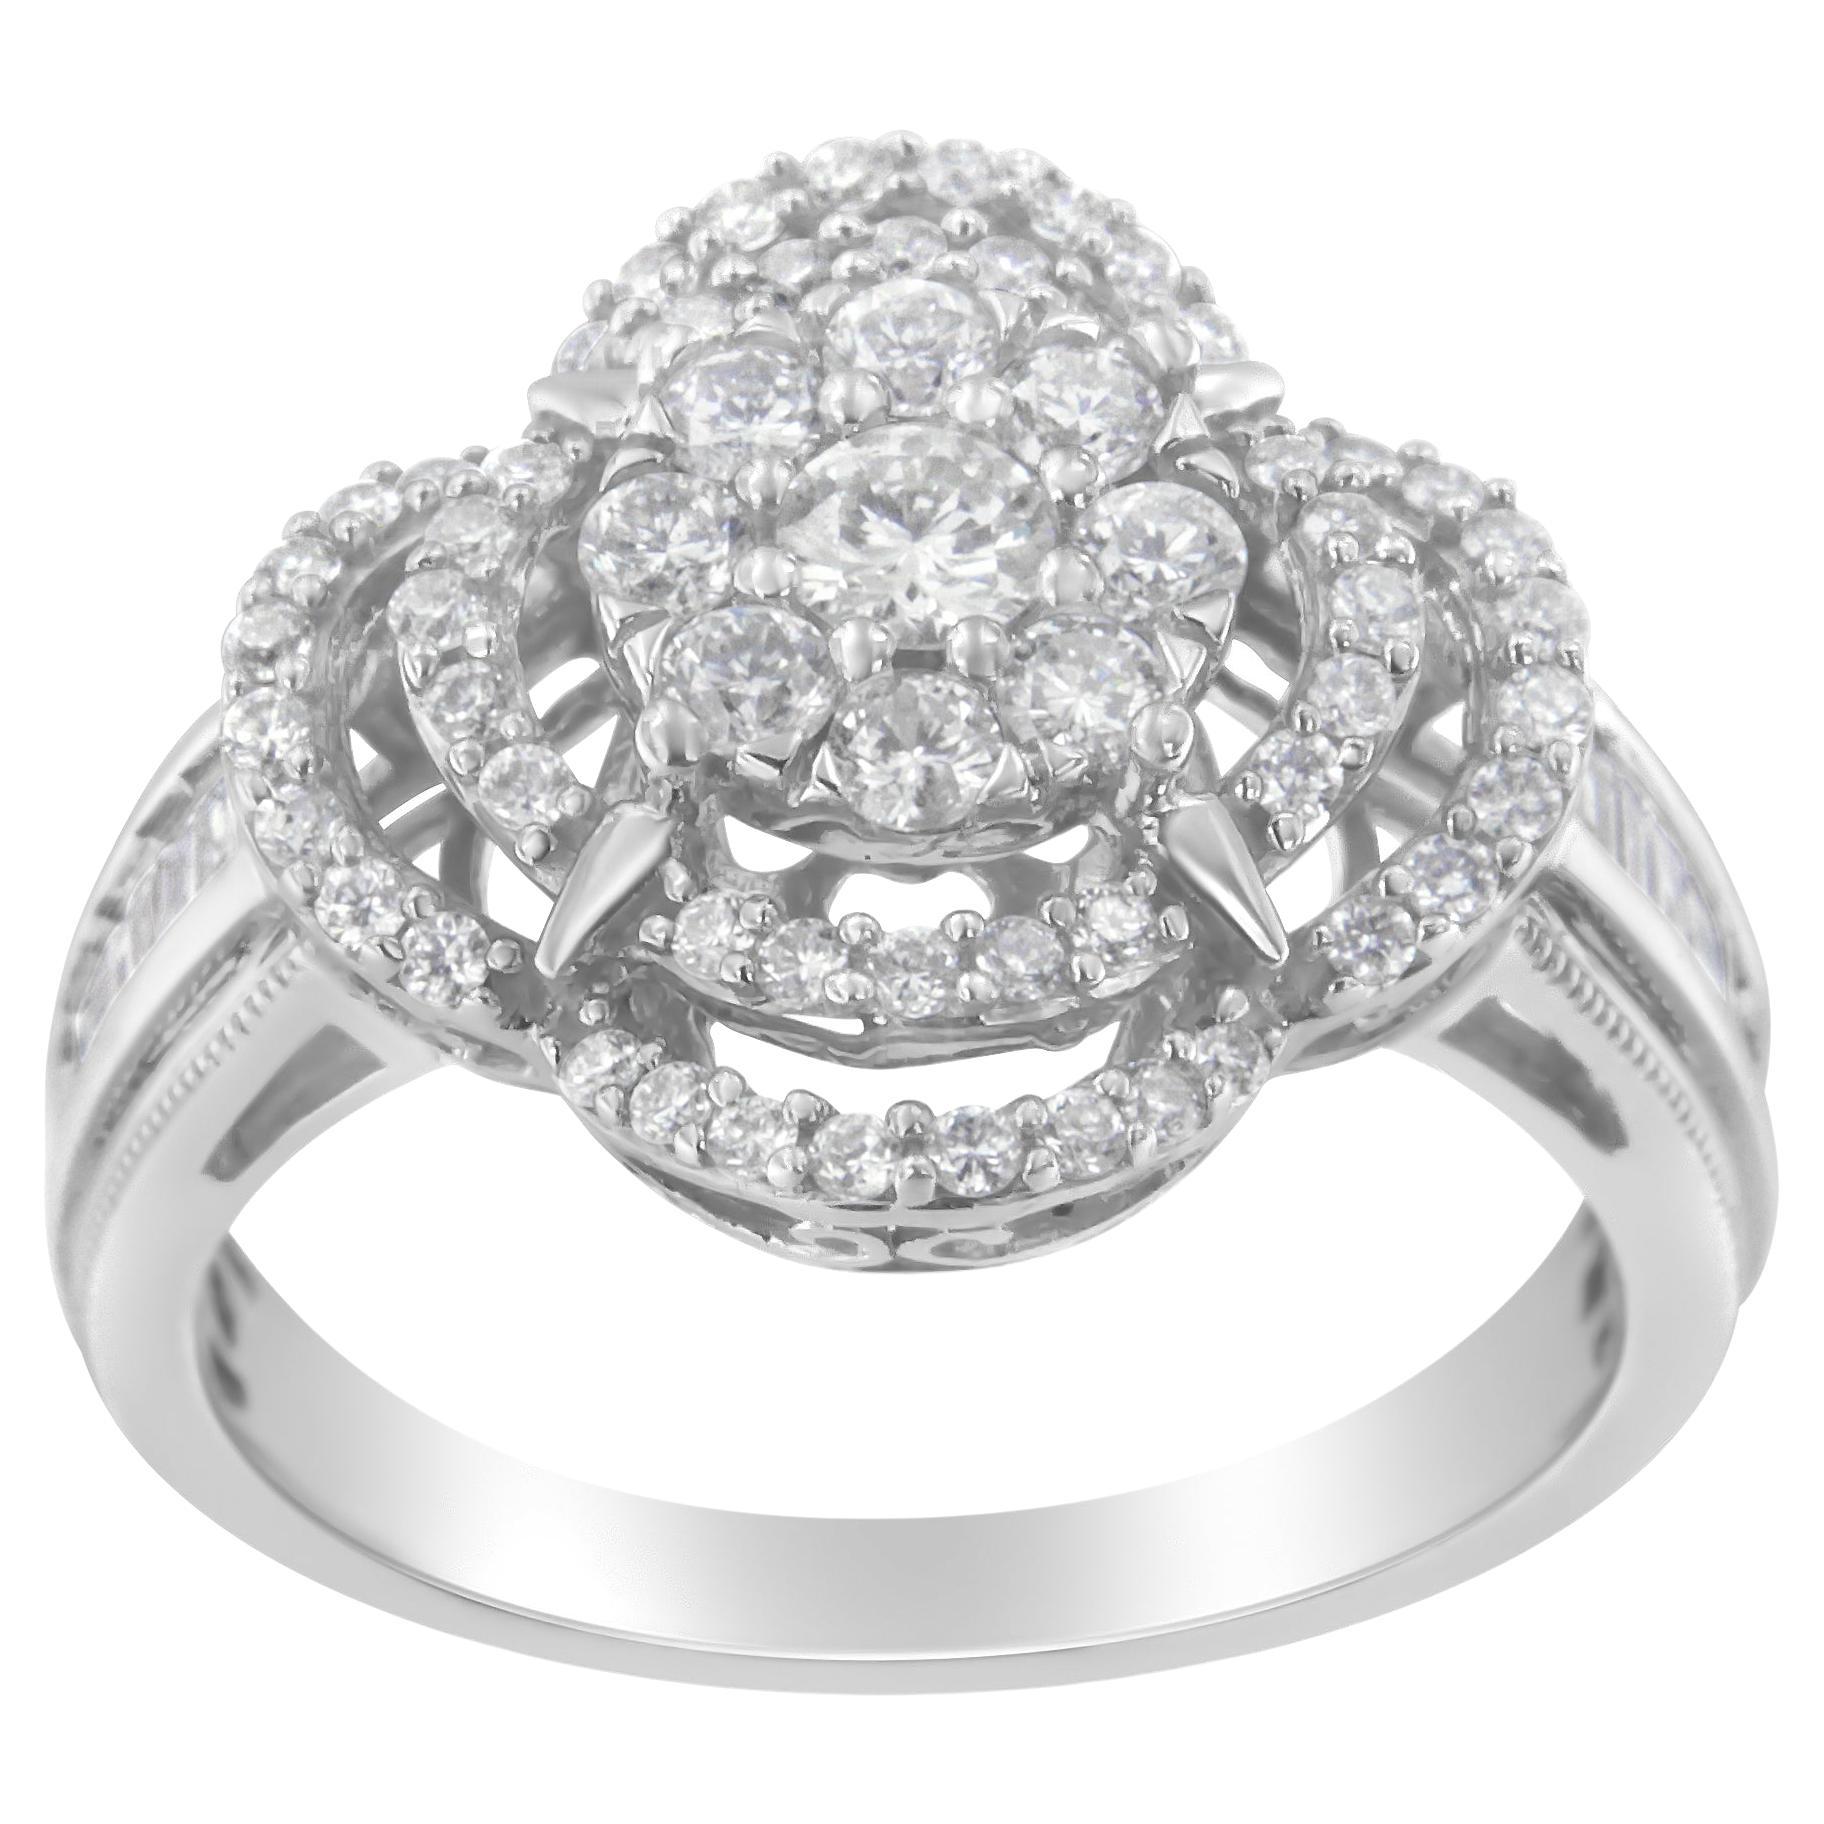 14K White Gold 1 Carat Round and Baguette Diamond Floral Cluster Ring